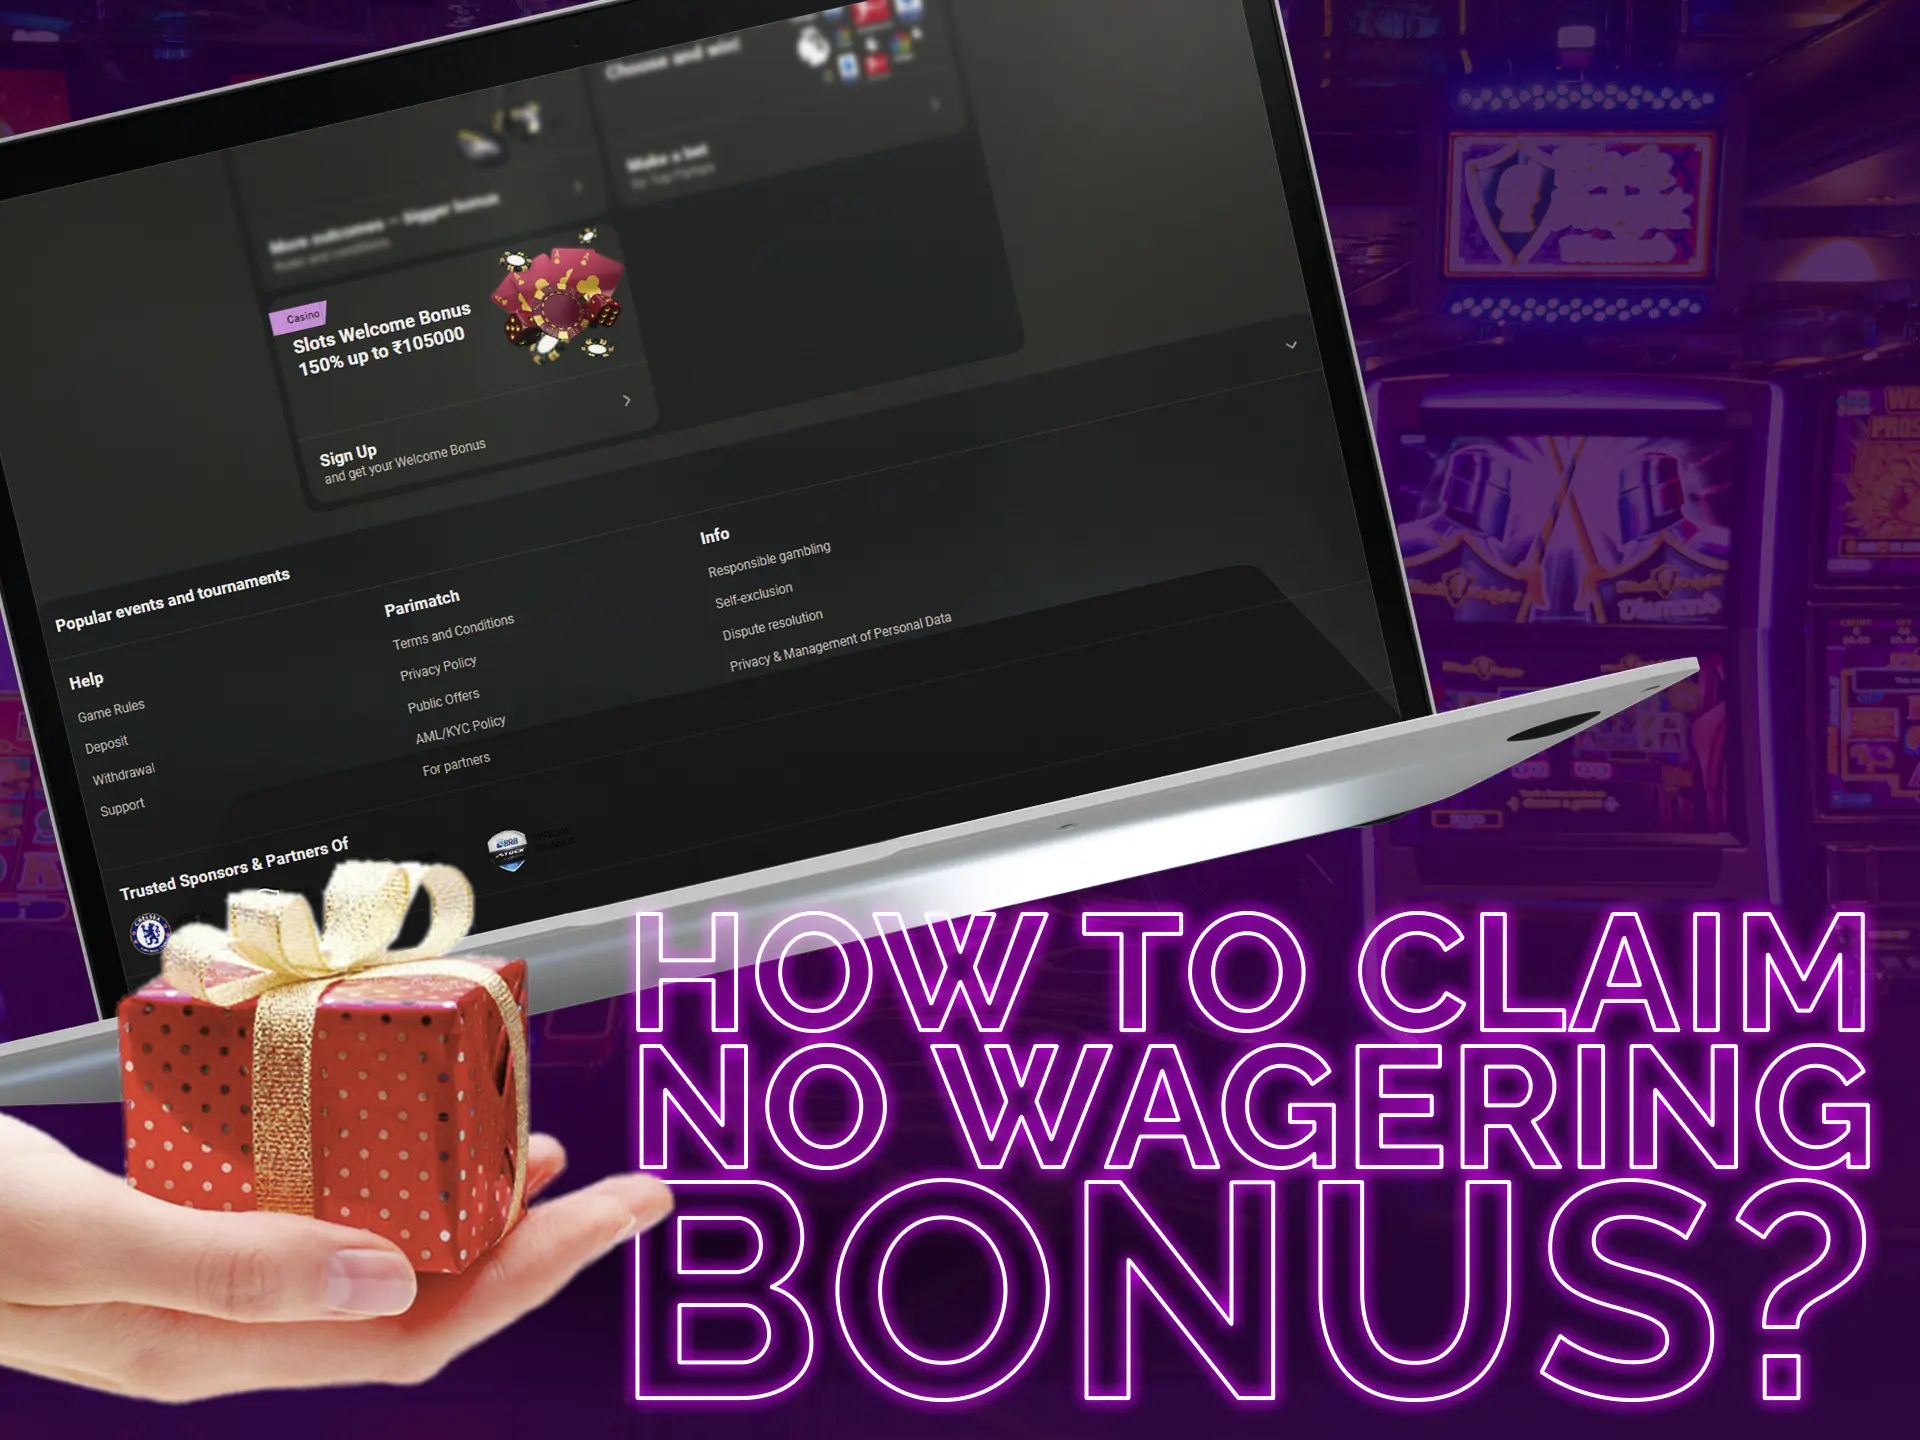 Learn how to claim the no-wagering bonus and enjoy it.